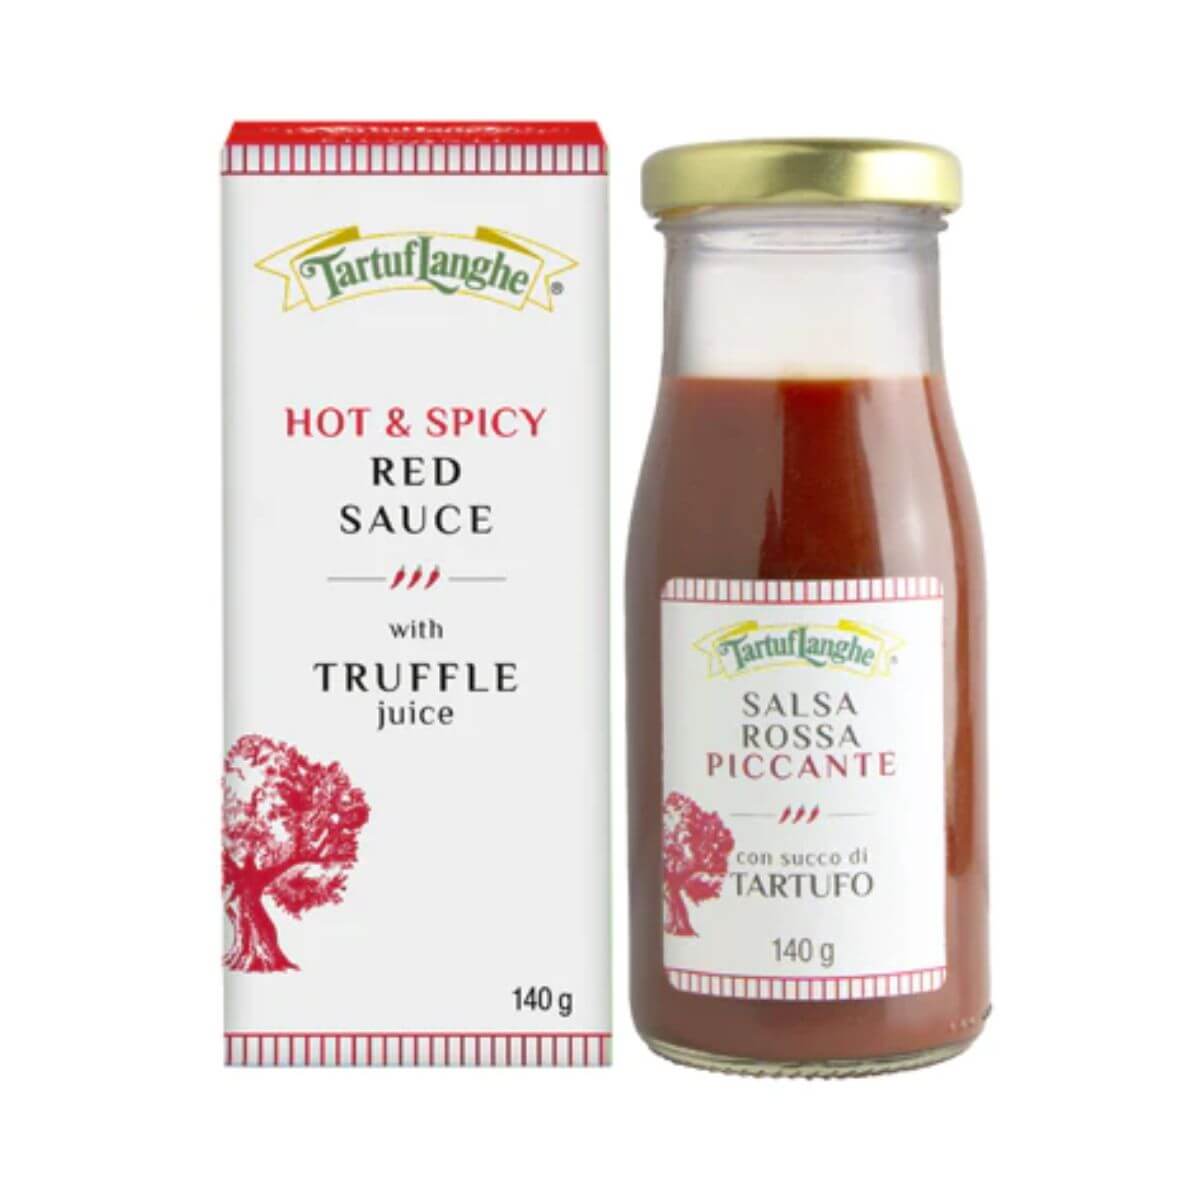 https://www.yummybazr.shop/wp-content/uploads/1695/41/shop-for-the-newest-tartuflanghe-italian-hot-and-spicy-red-sauce-with-truffle-juice-4-94-oz-140-g-supply_0.jpg